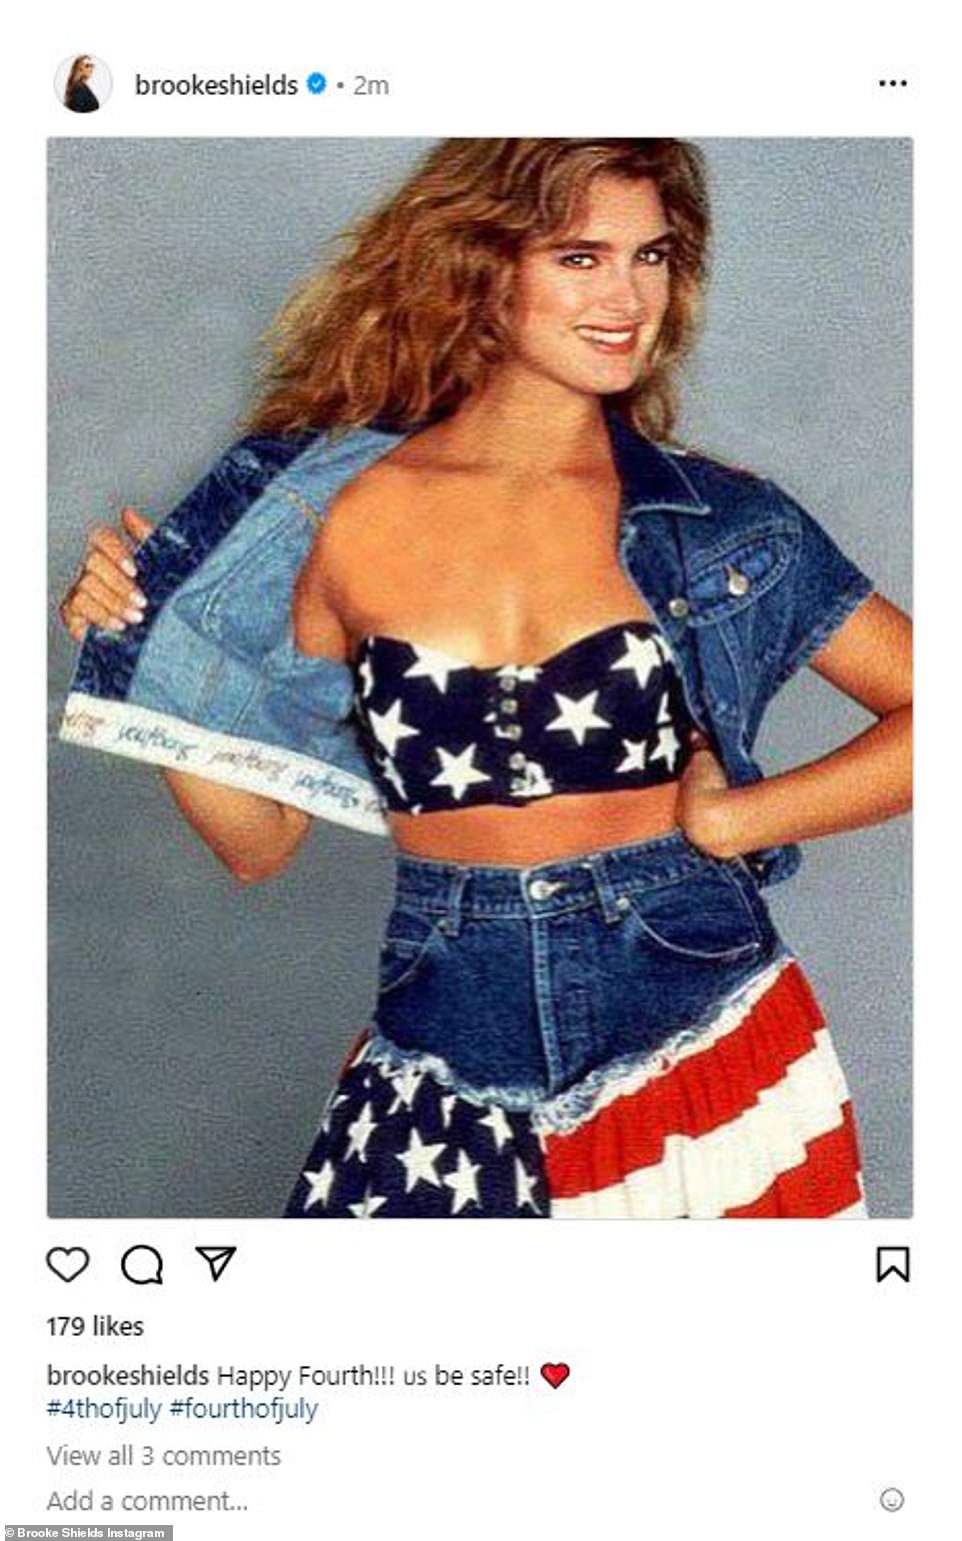 4th! Fourth of July - which fell on a Tuesday this year - is here. Stars were quick to take to social media to wish their followers well on the annual American holiday that is also known as Independence Day. Brooke Shields was one of the first celebrities to take to Instagram to wish all well as she posted a pretty throwback photo from her modeling days. 'Happy 4th! US be safe,' wrote the actress in her caption